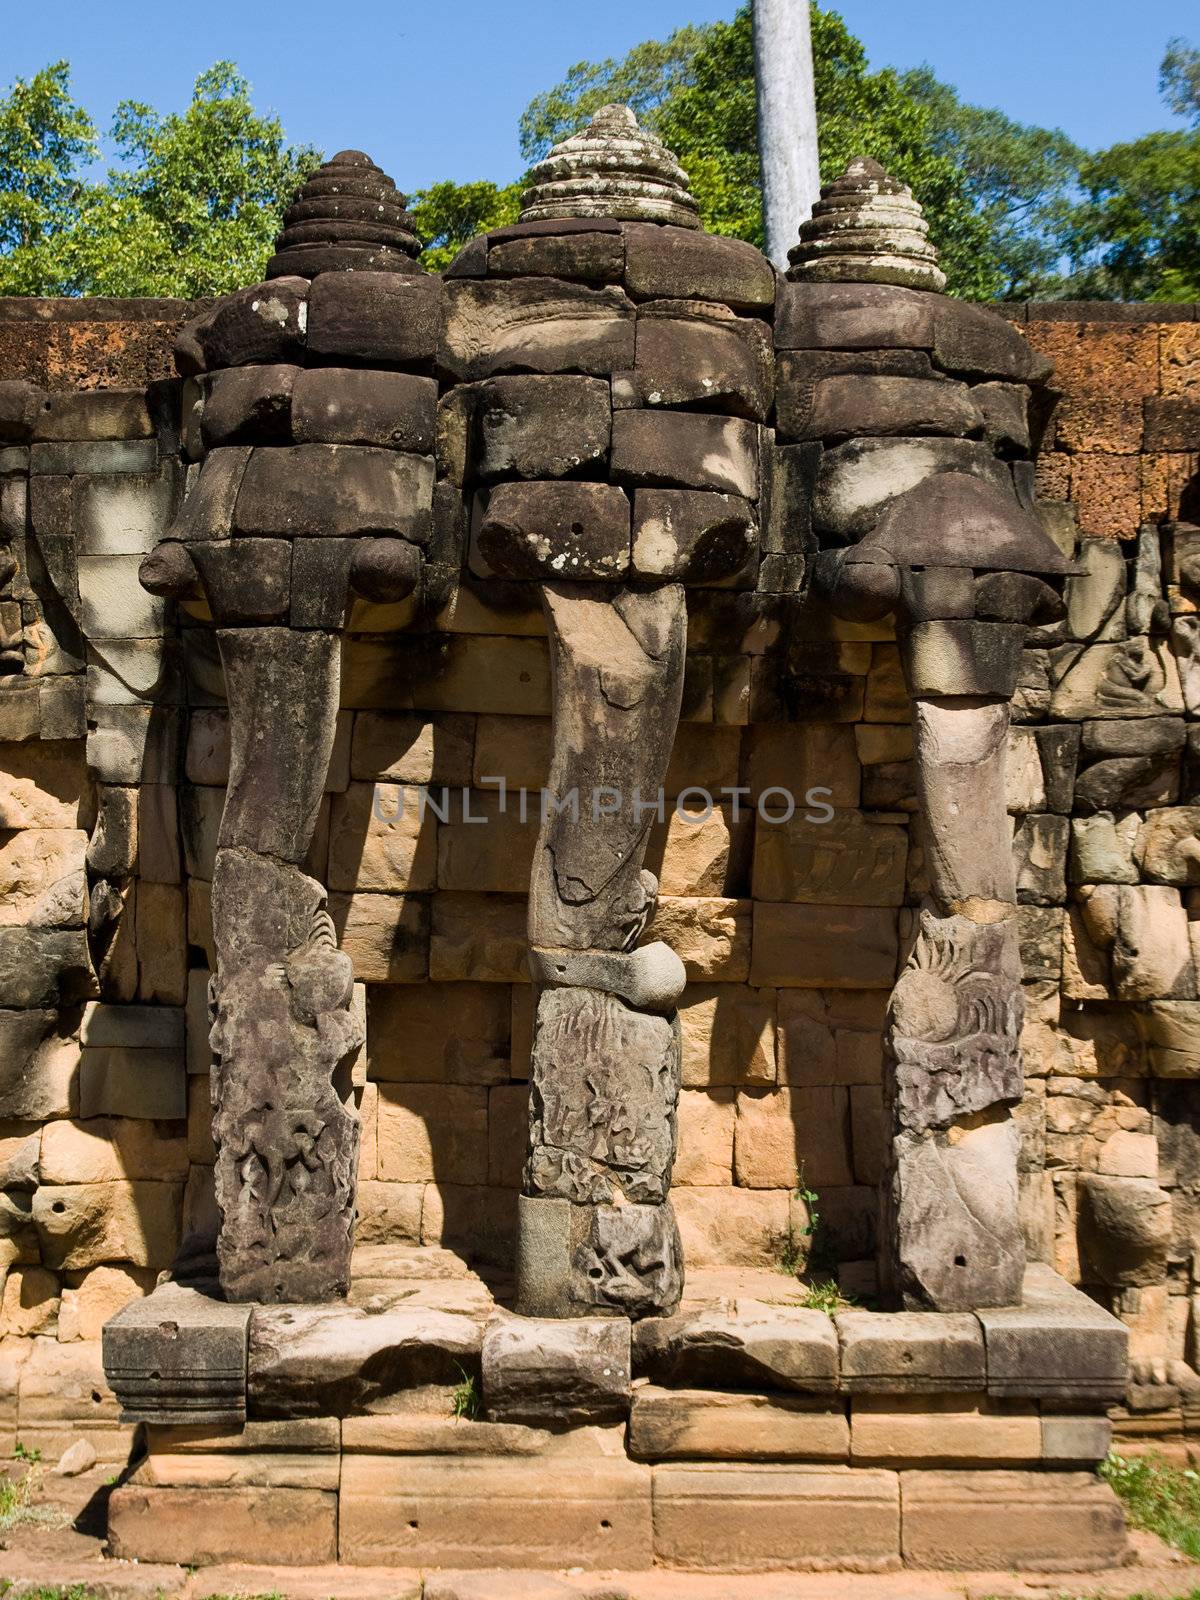 The picture of the three head cambodian elephant